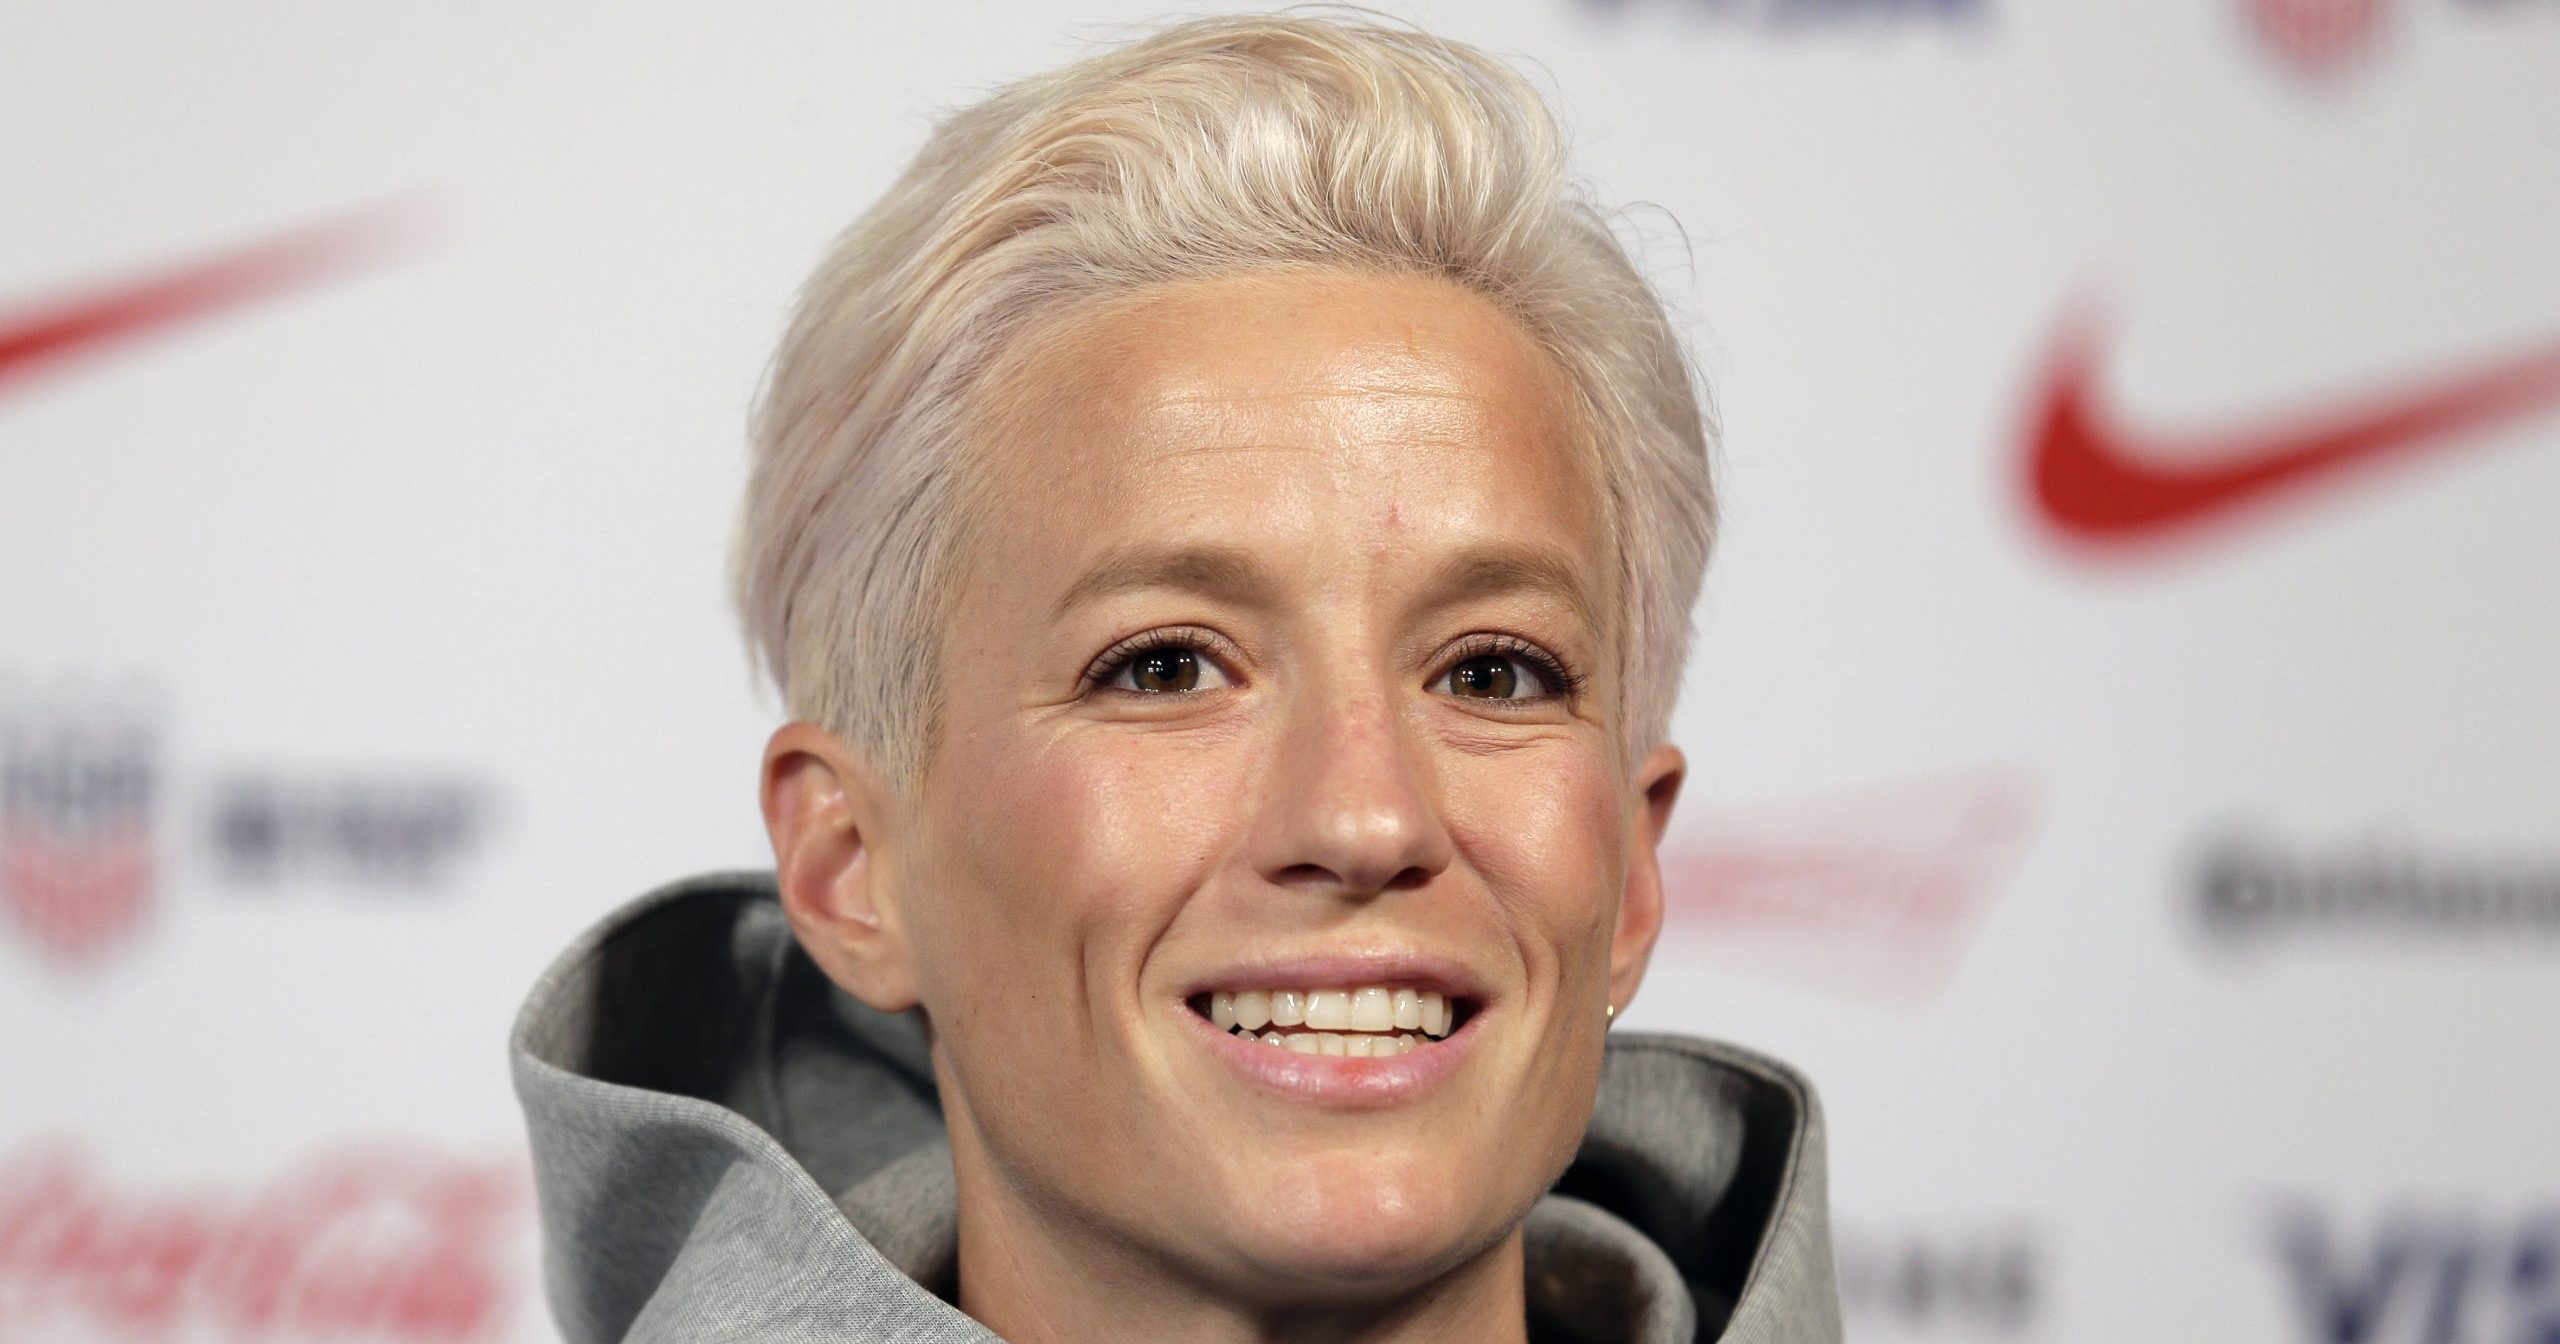 In this May 24, 2019, file photo, Megan Rapinoe, a member of the United States women's national soccer team, speaks to reporters during a news conference in New York.